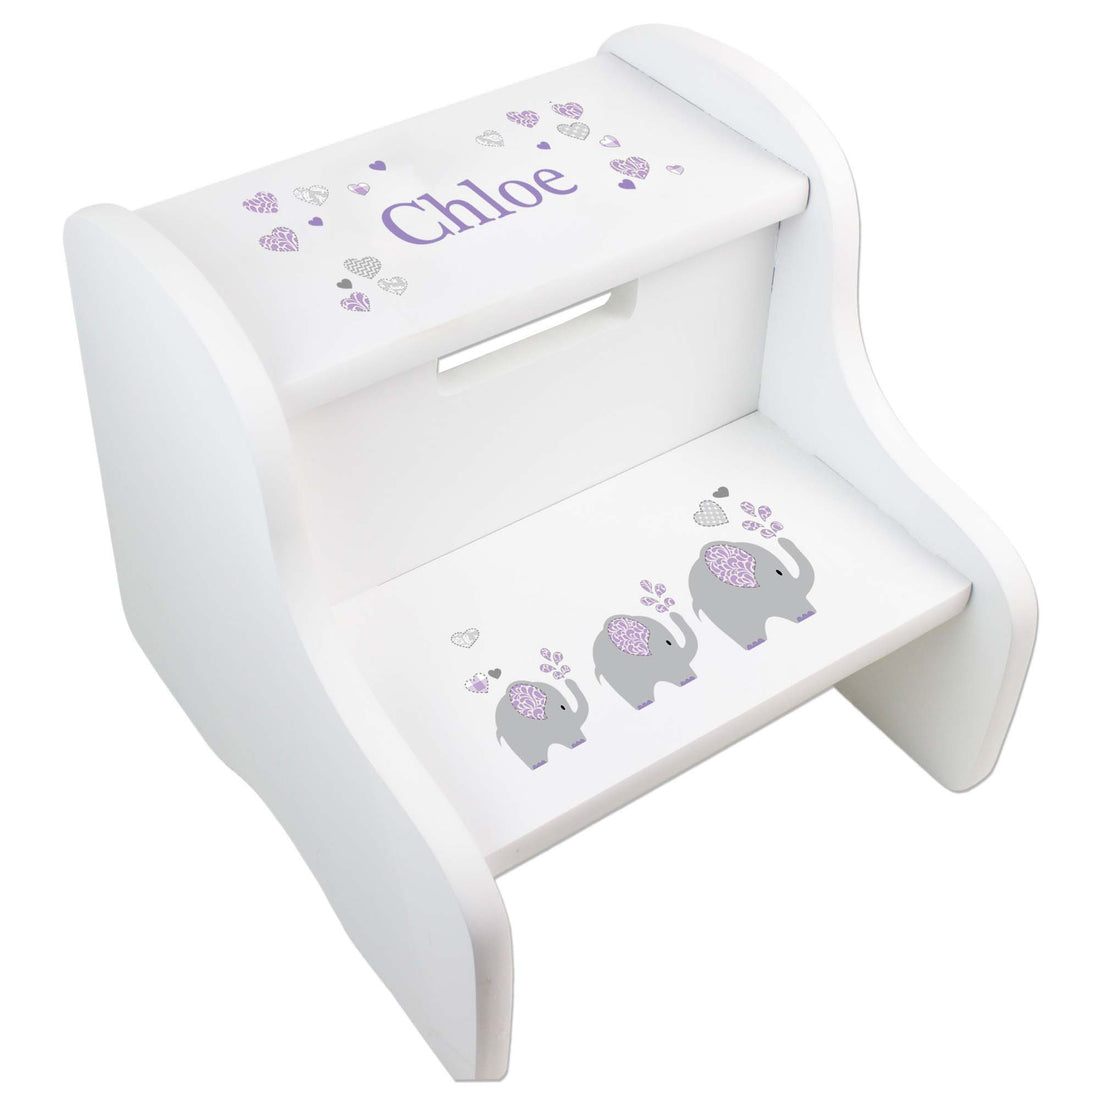 Personalized Lavender Elephant White Two Step Stool